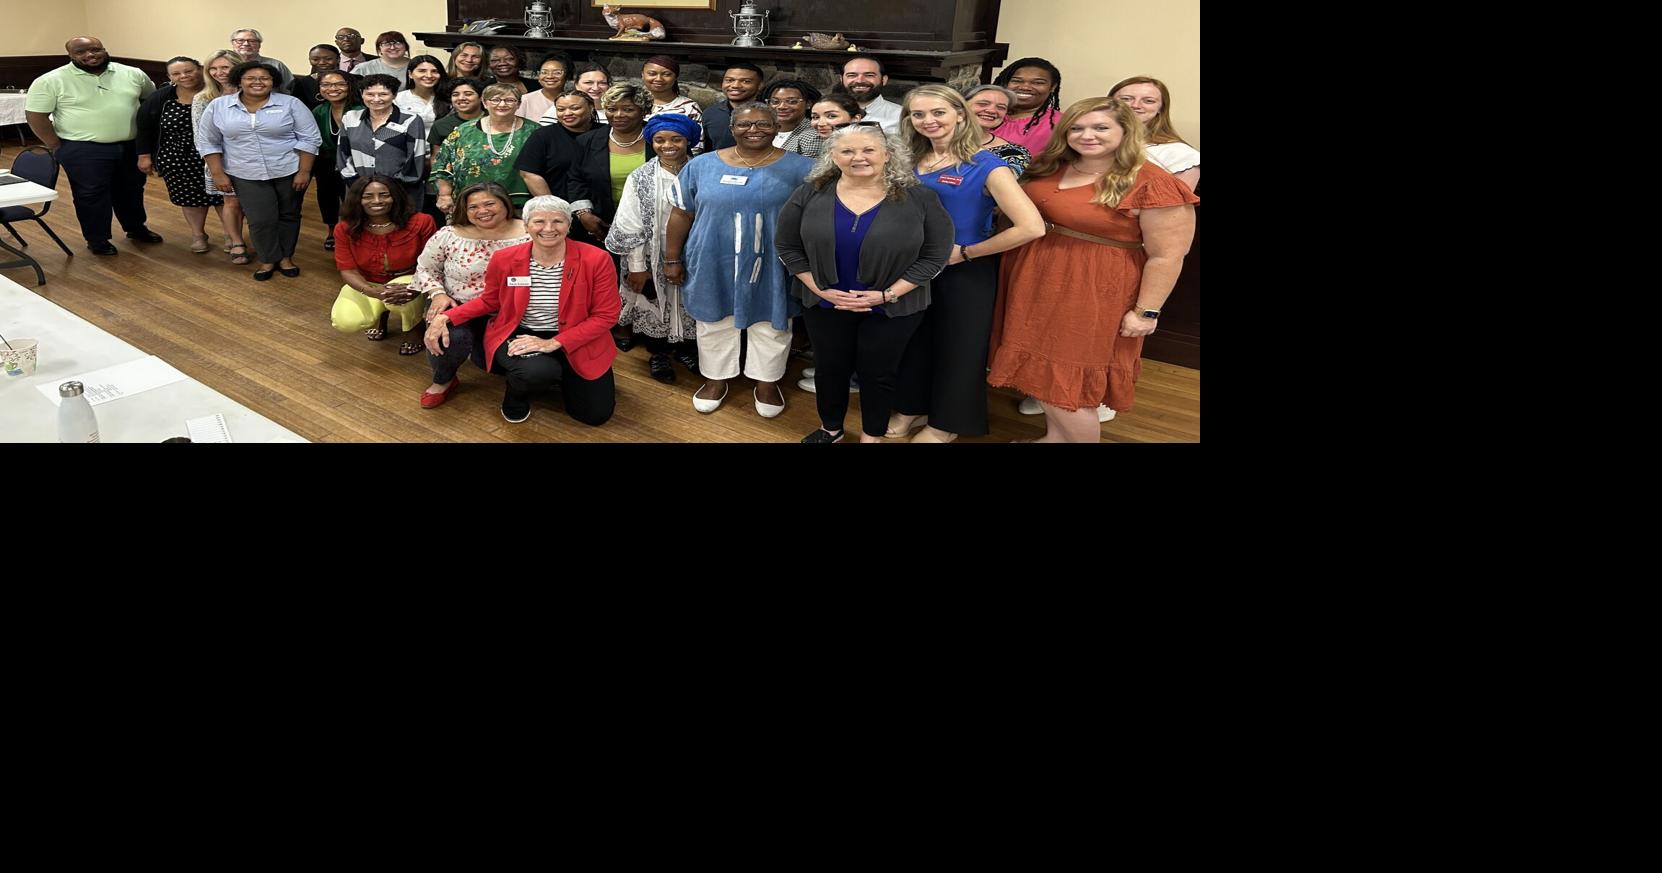 May 27 – Healthy Savannah Releases Results of Community Feedback on Healthy Food Access, Physical Activity Opportunities and Community Resources at Quarterly Stakeholders Meeting